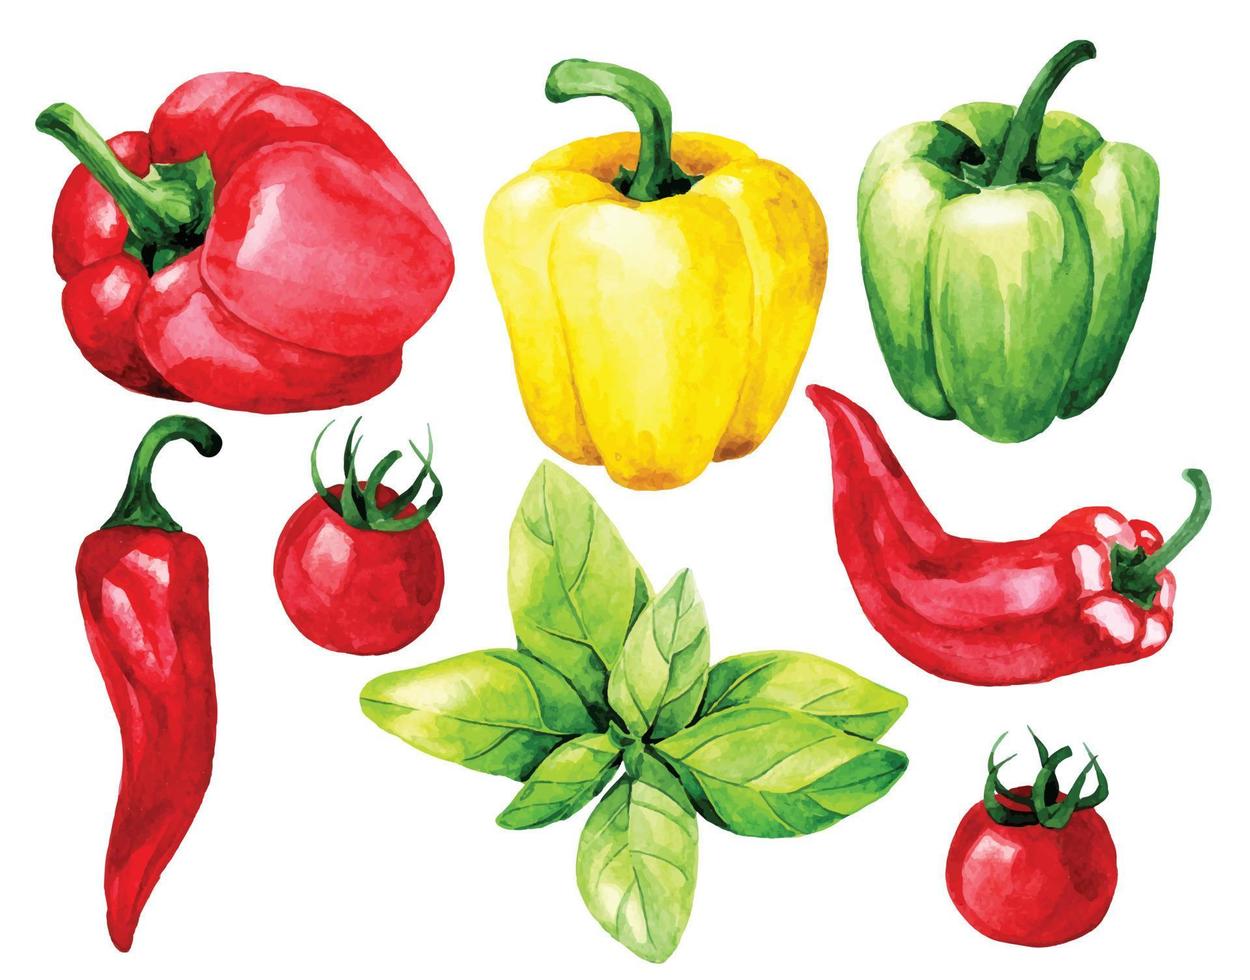 watercolor drawing. set of vegetables and culinary herbs. basil, bell pepper, chili pepper, tomatoes vector